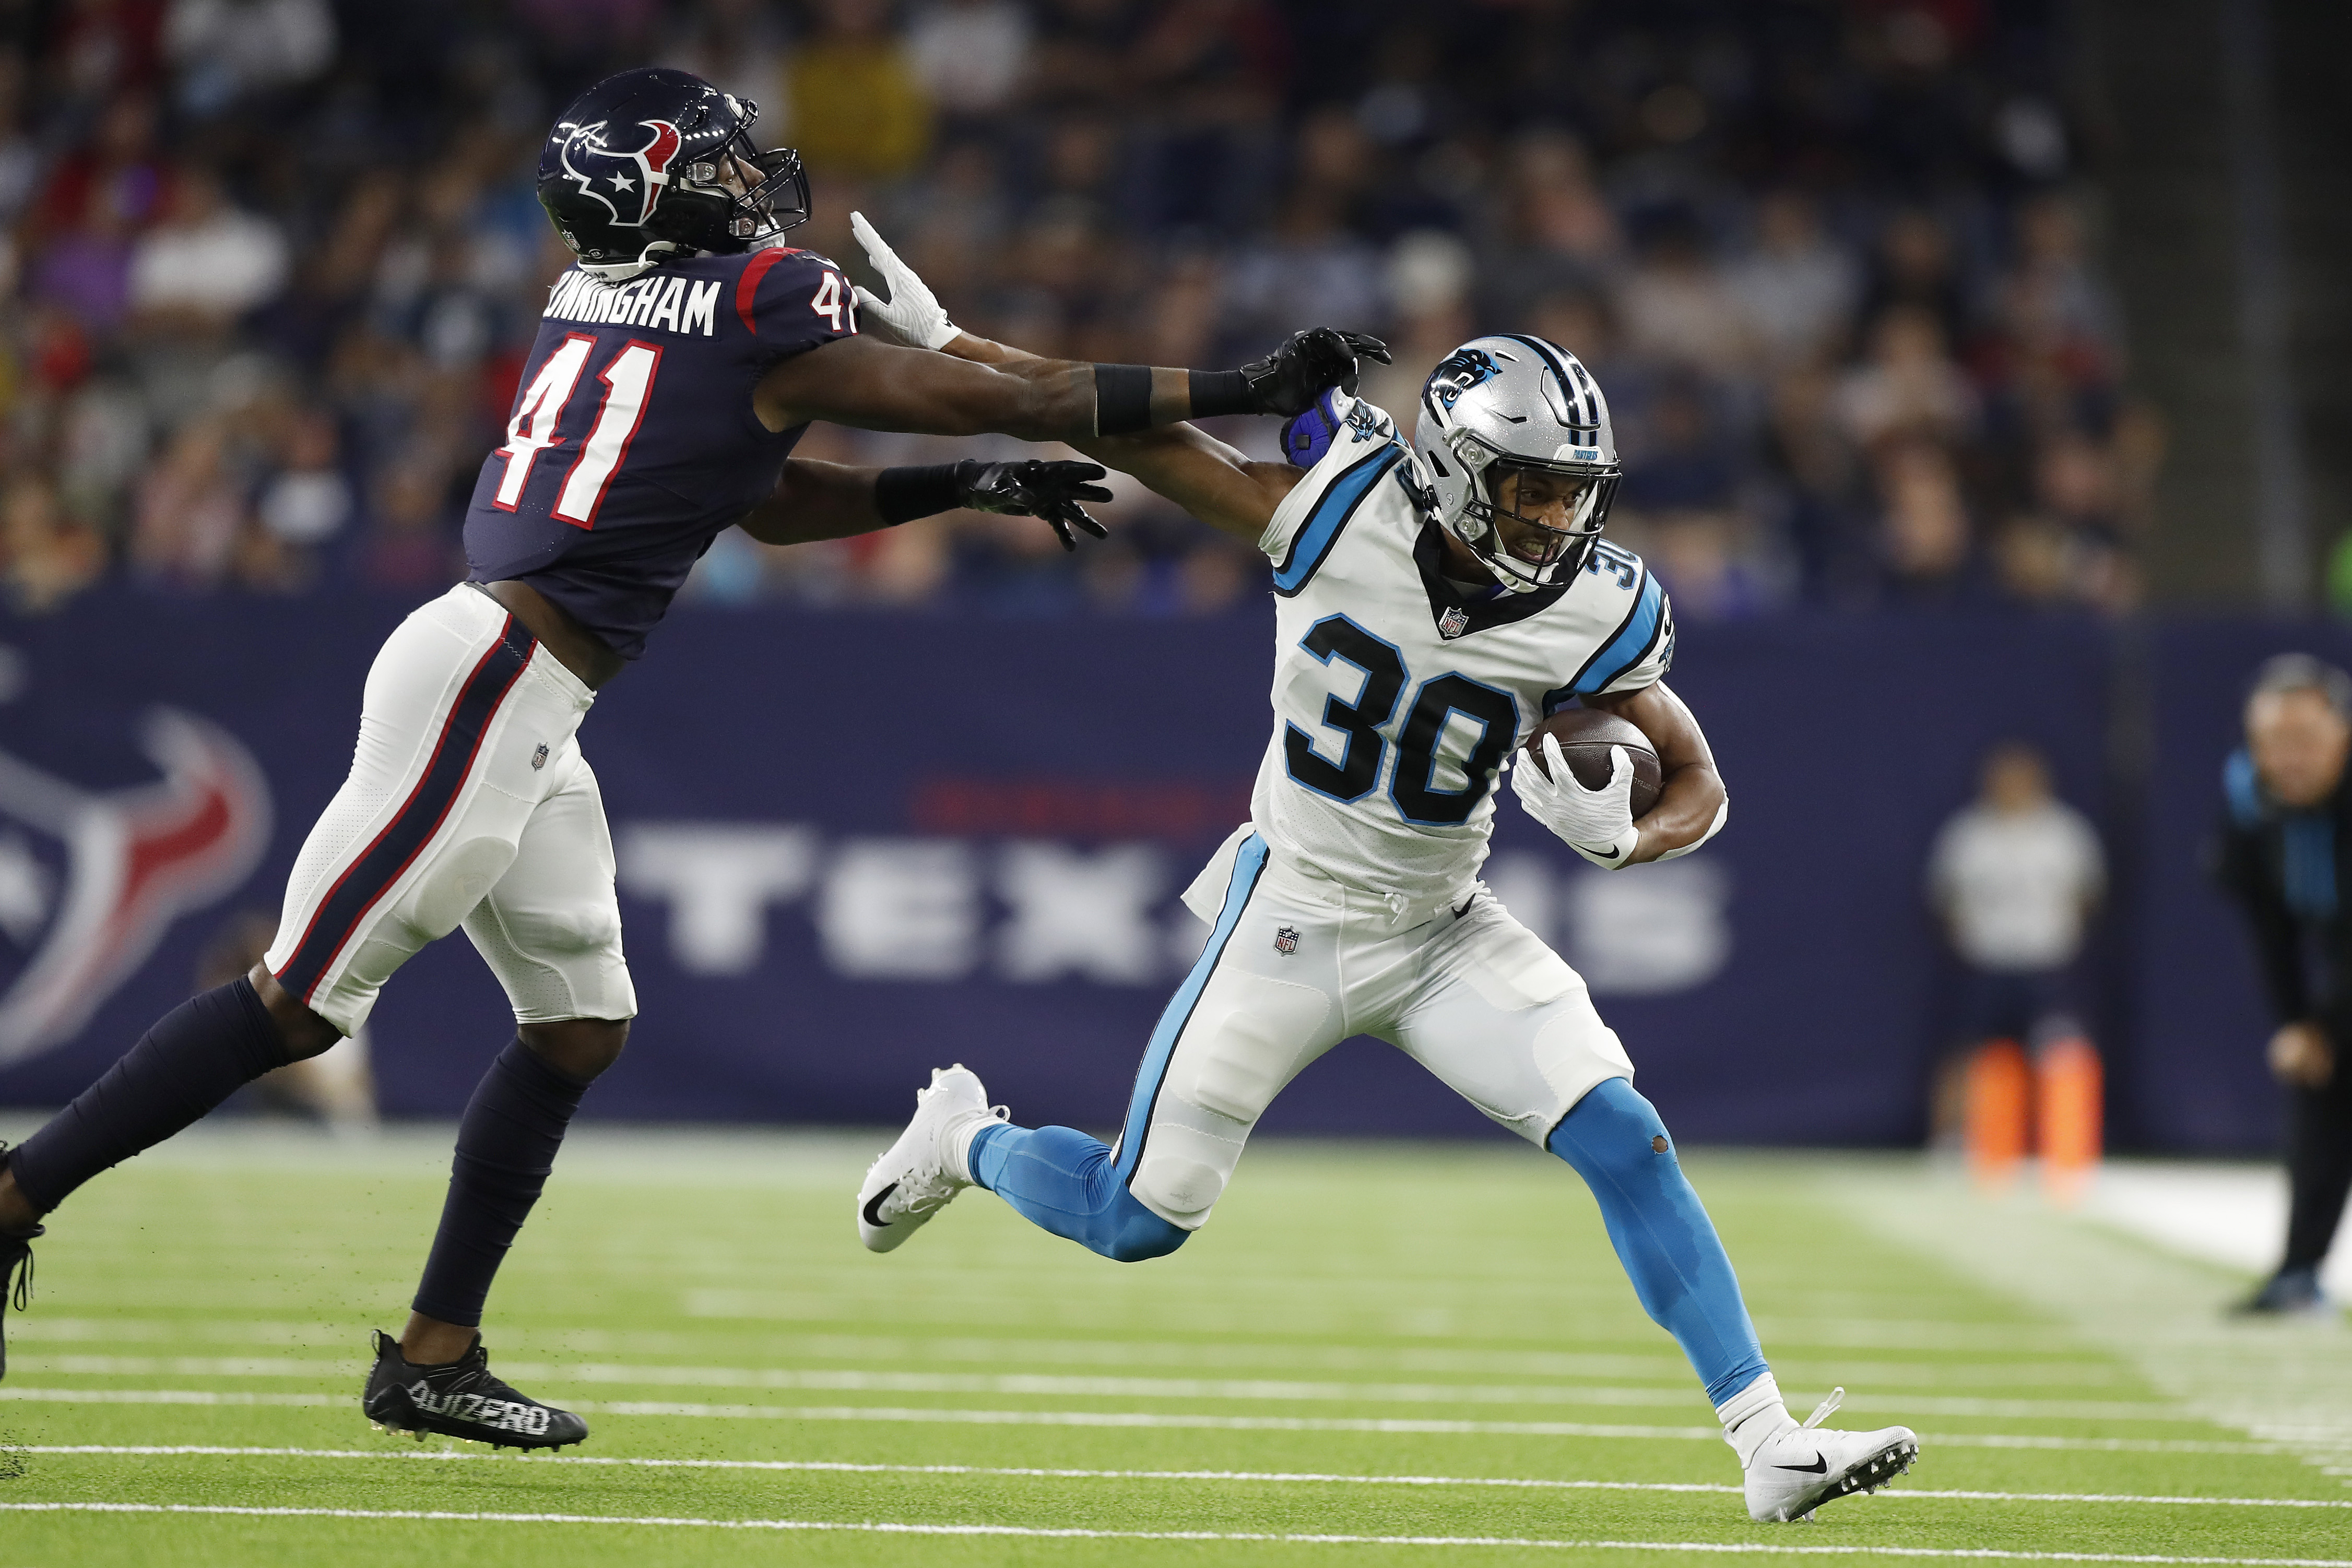 Carolina Panthers running back Chuba Hubbard is the hot name on the waiver wire for your fantasy football team in Week 4.